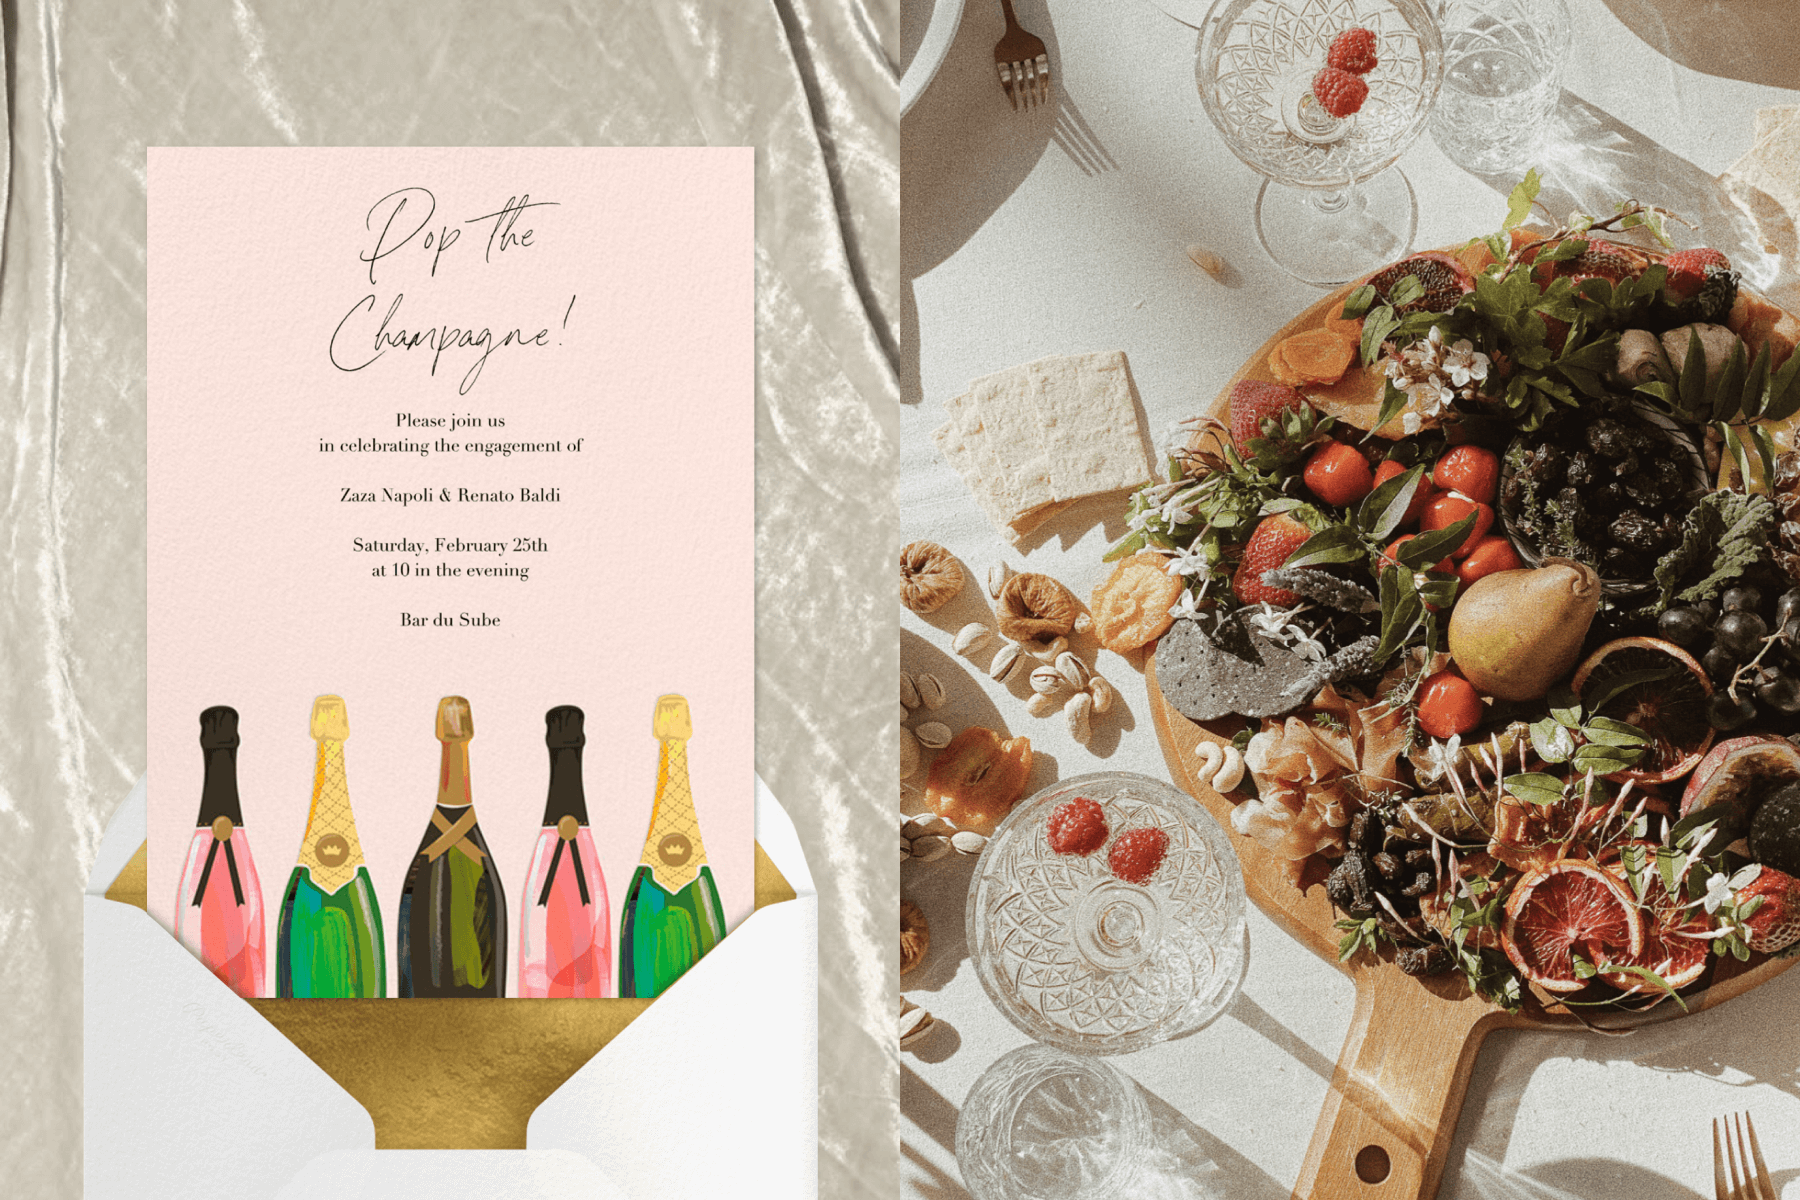 left: A light pink invitation with painted Champagne bottles at the bottom. Right: A wooden serving board is overflowing with fruit and nuts on a table with etched coupe glasses.